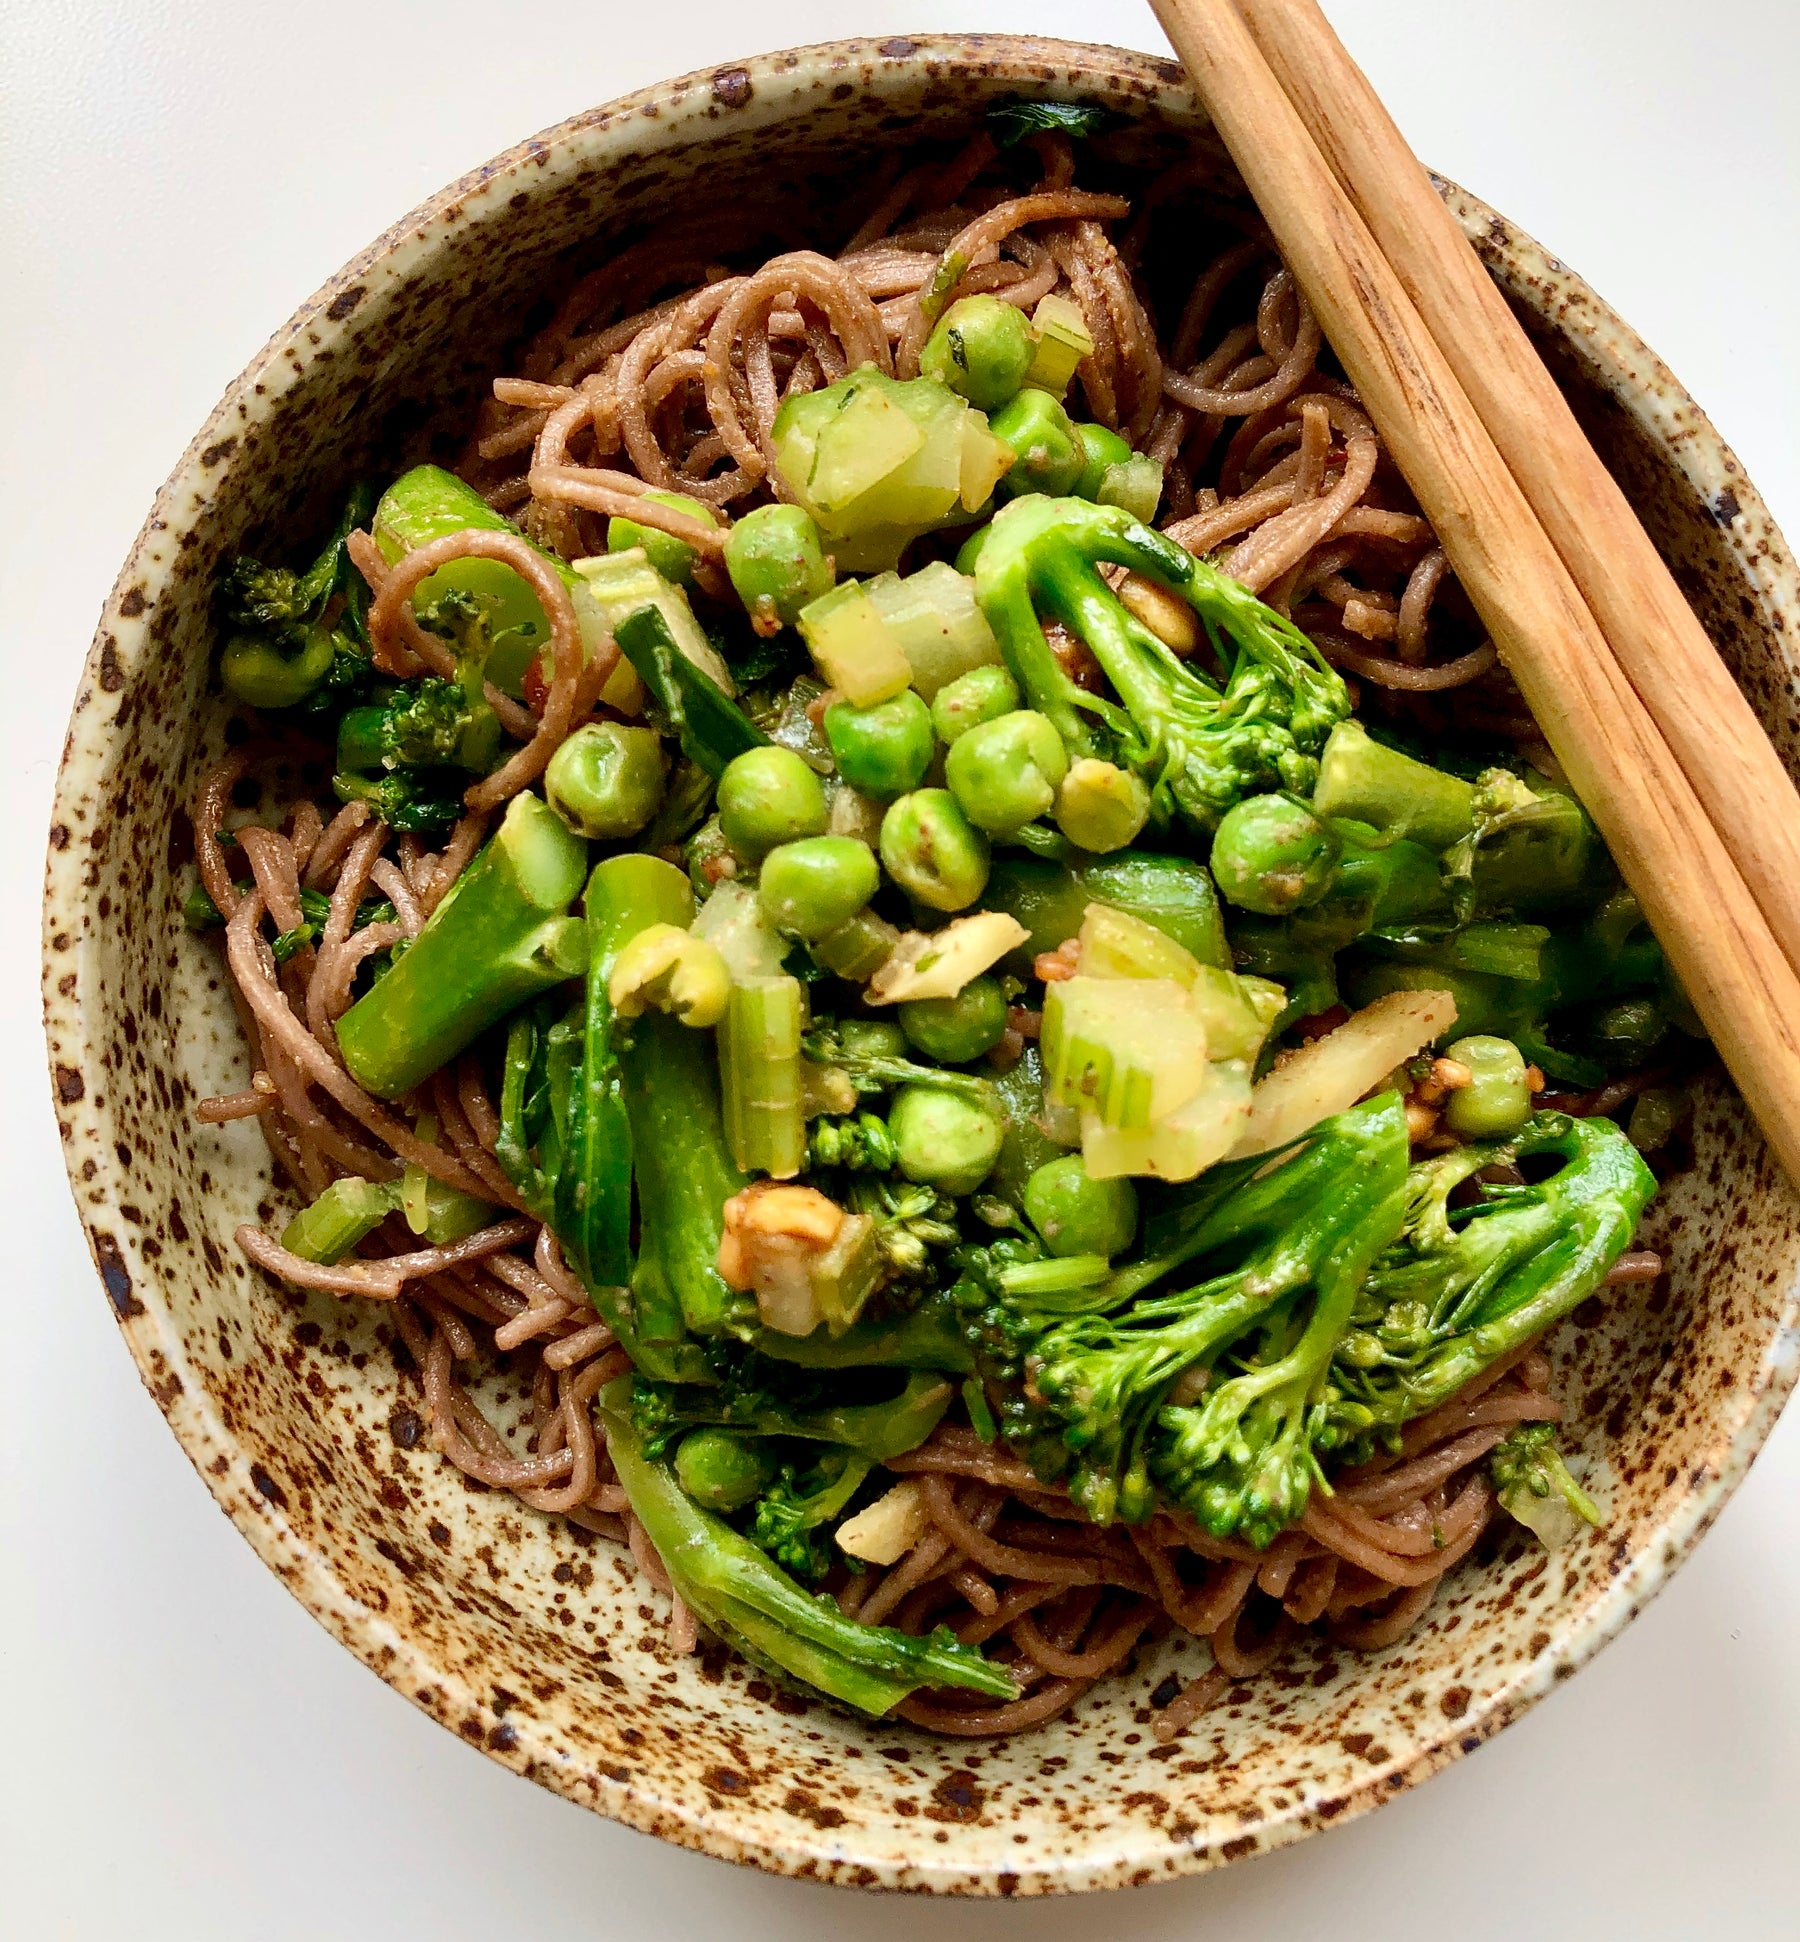 KIRR Eats: Buckwheat Soba Noodles with Greens and a Peanut Wasabi Sauce by @SincerelyAline - KIRR